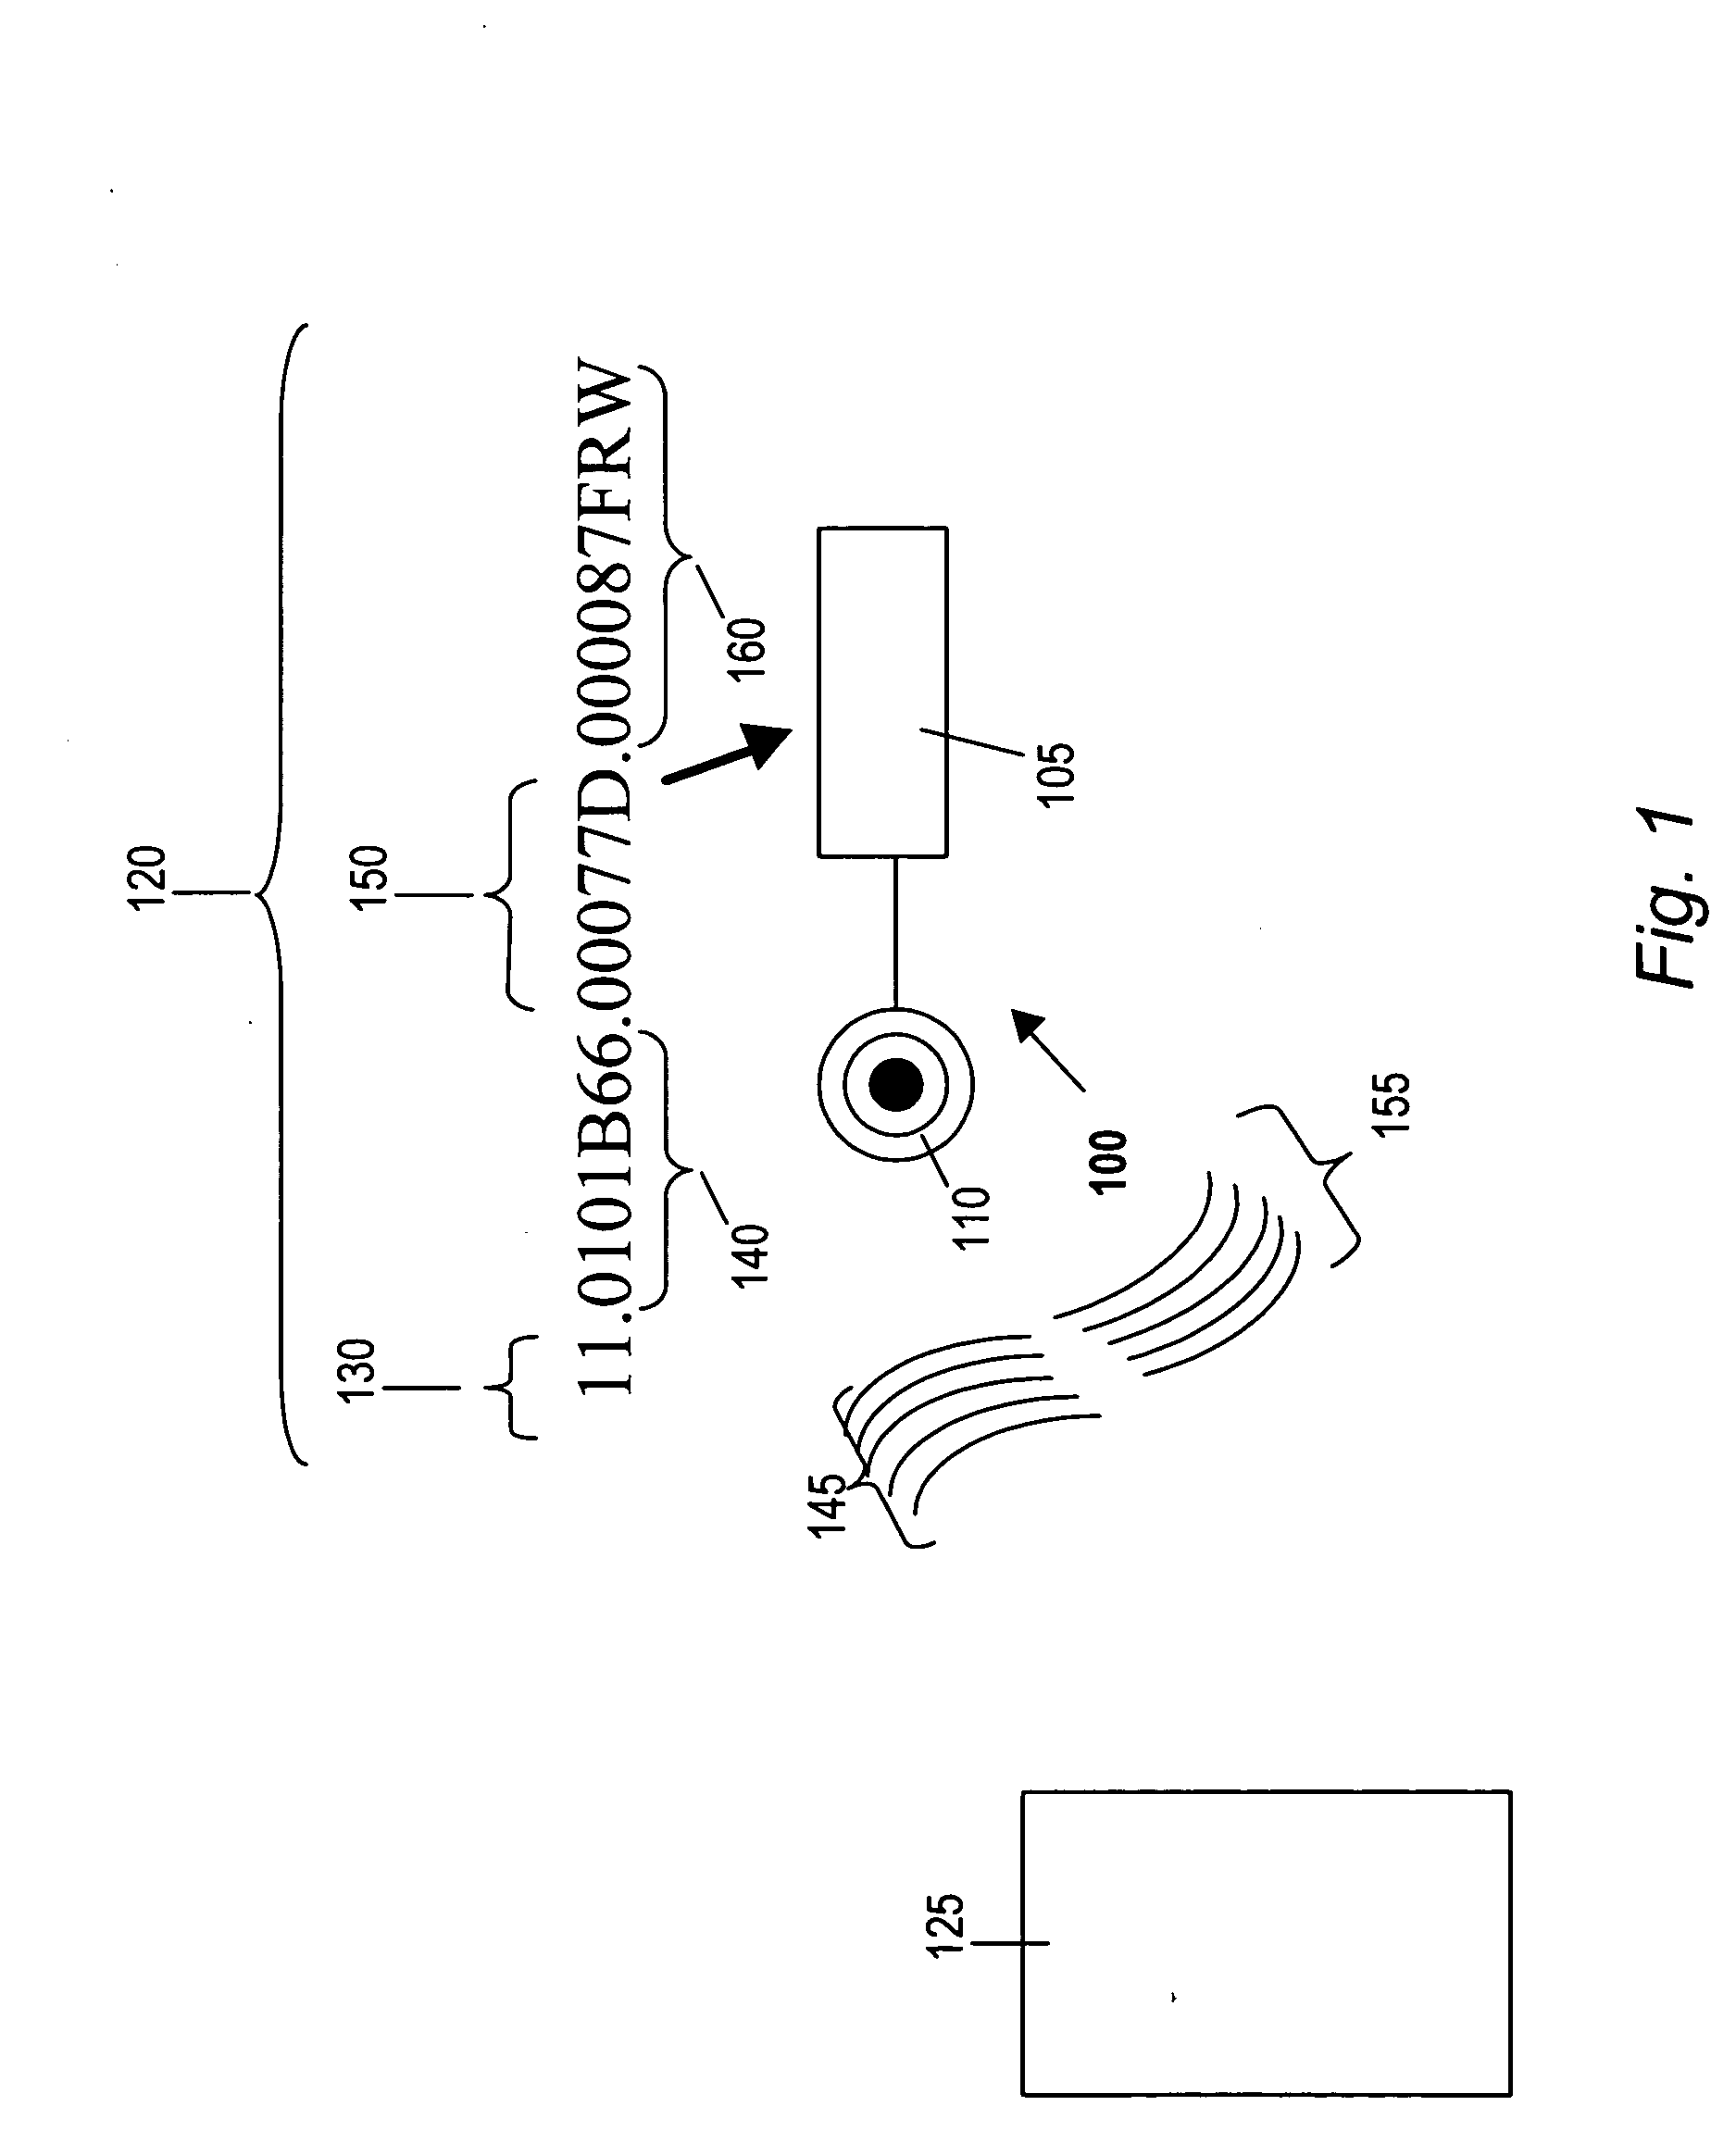 Methods and devices for uniquely provisioning RFID devices